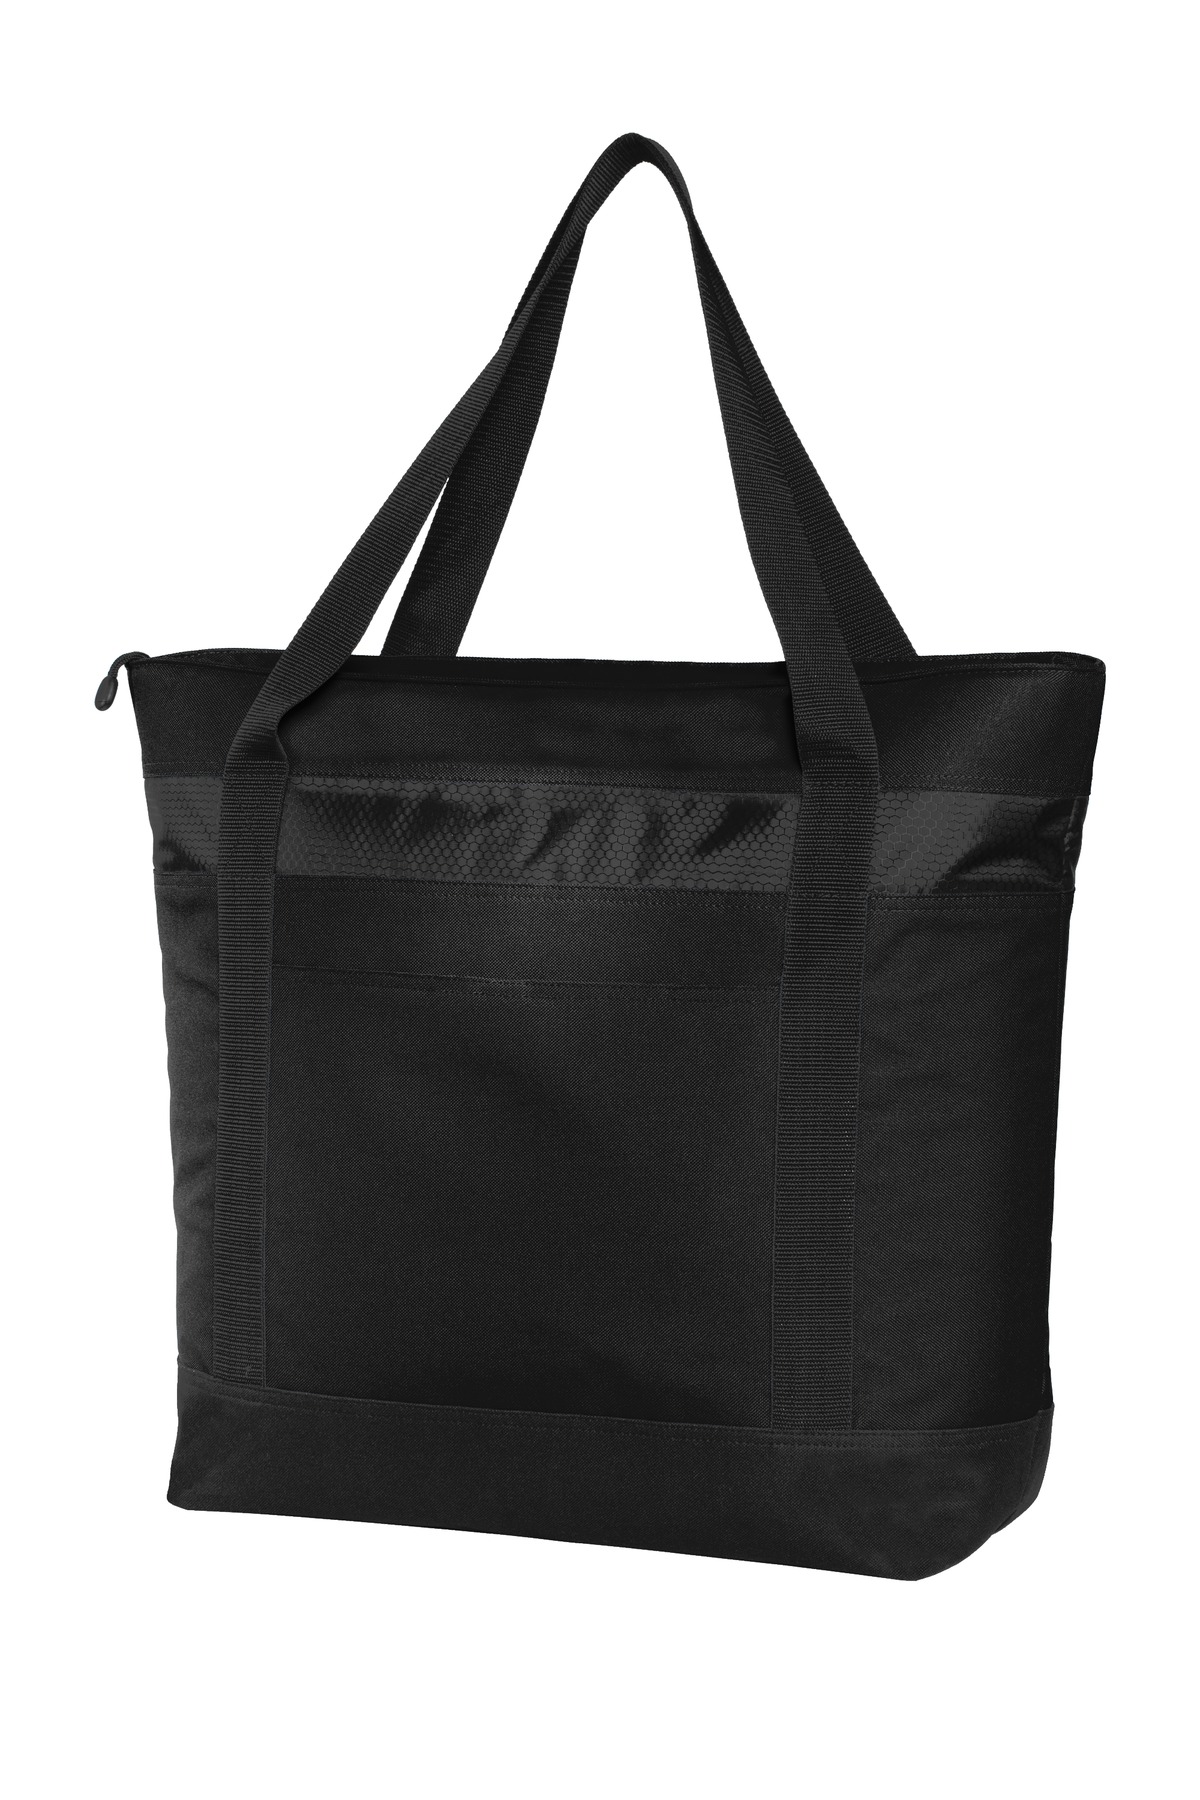 Port Authority Large Tote Cooler - BG527